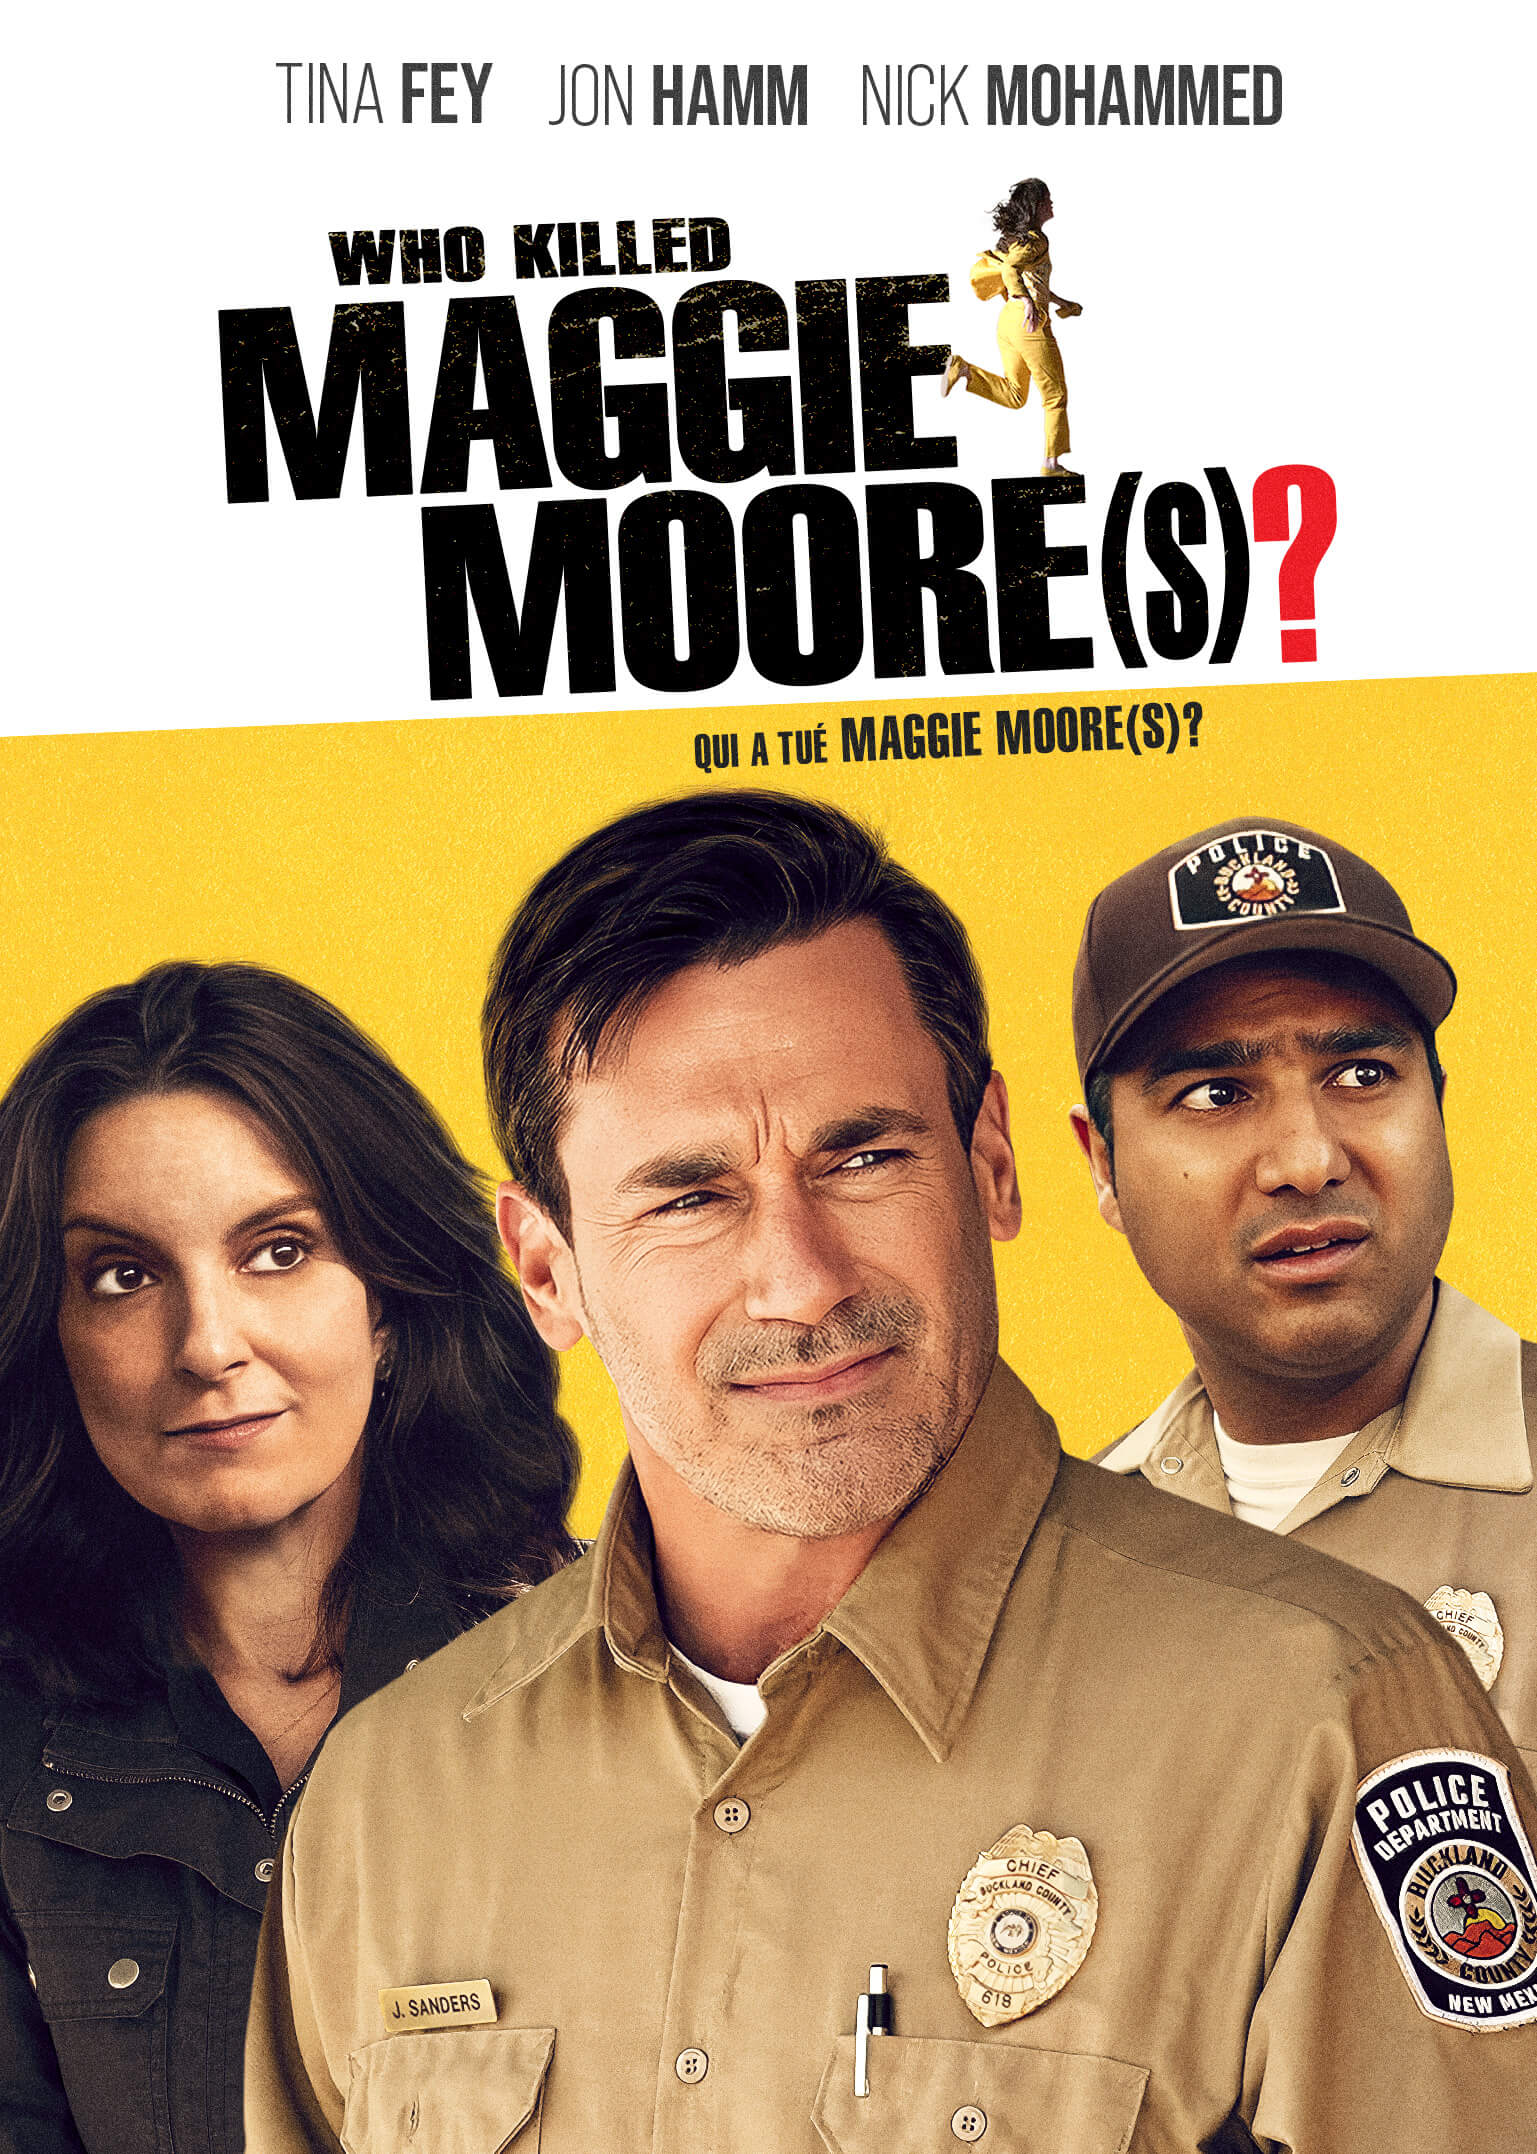 Who Killed Maggie Moore(s)? VVS Films